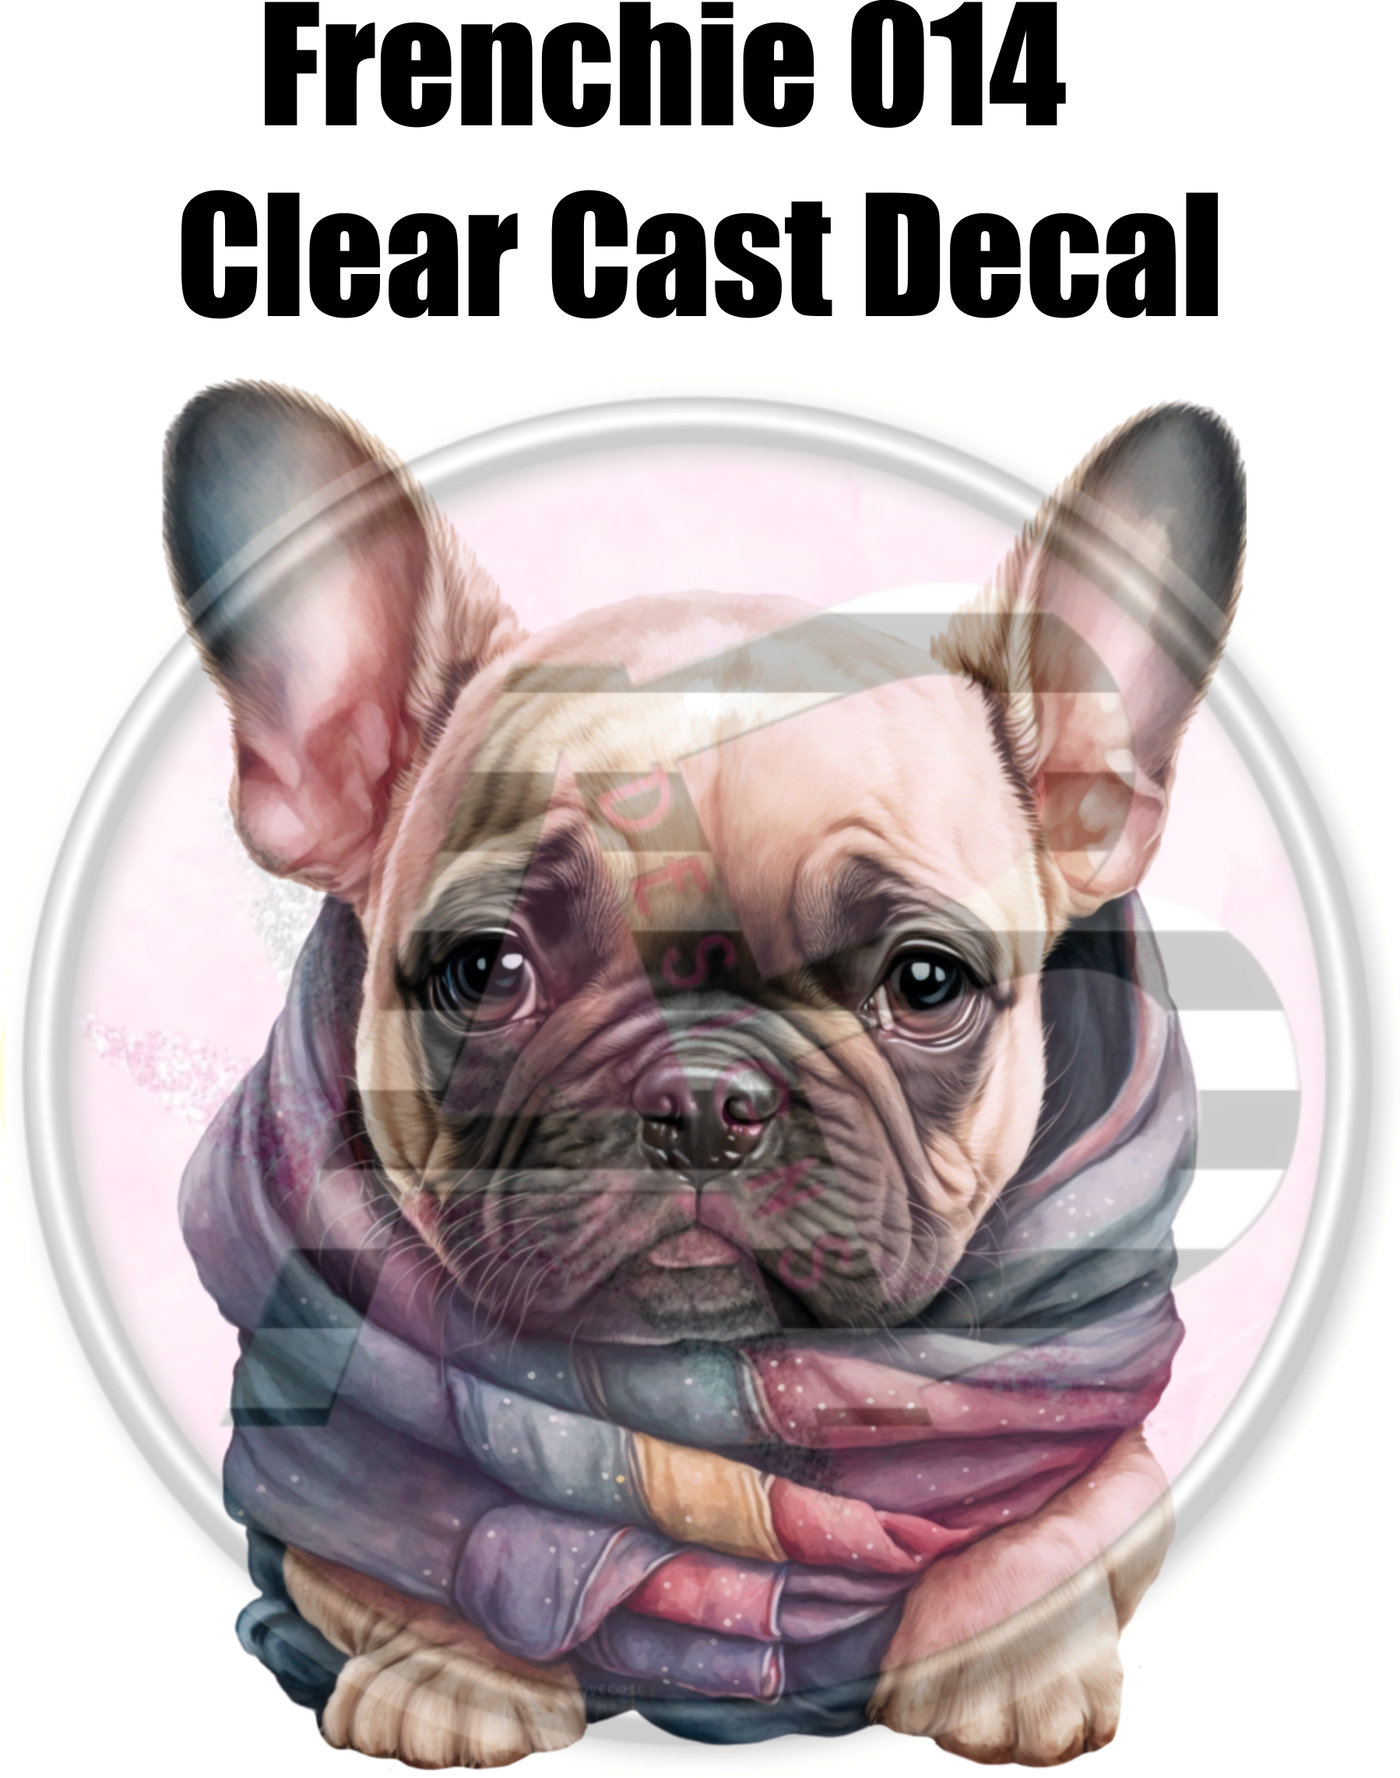 Frenchie 014 - Clear Cast Decal